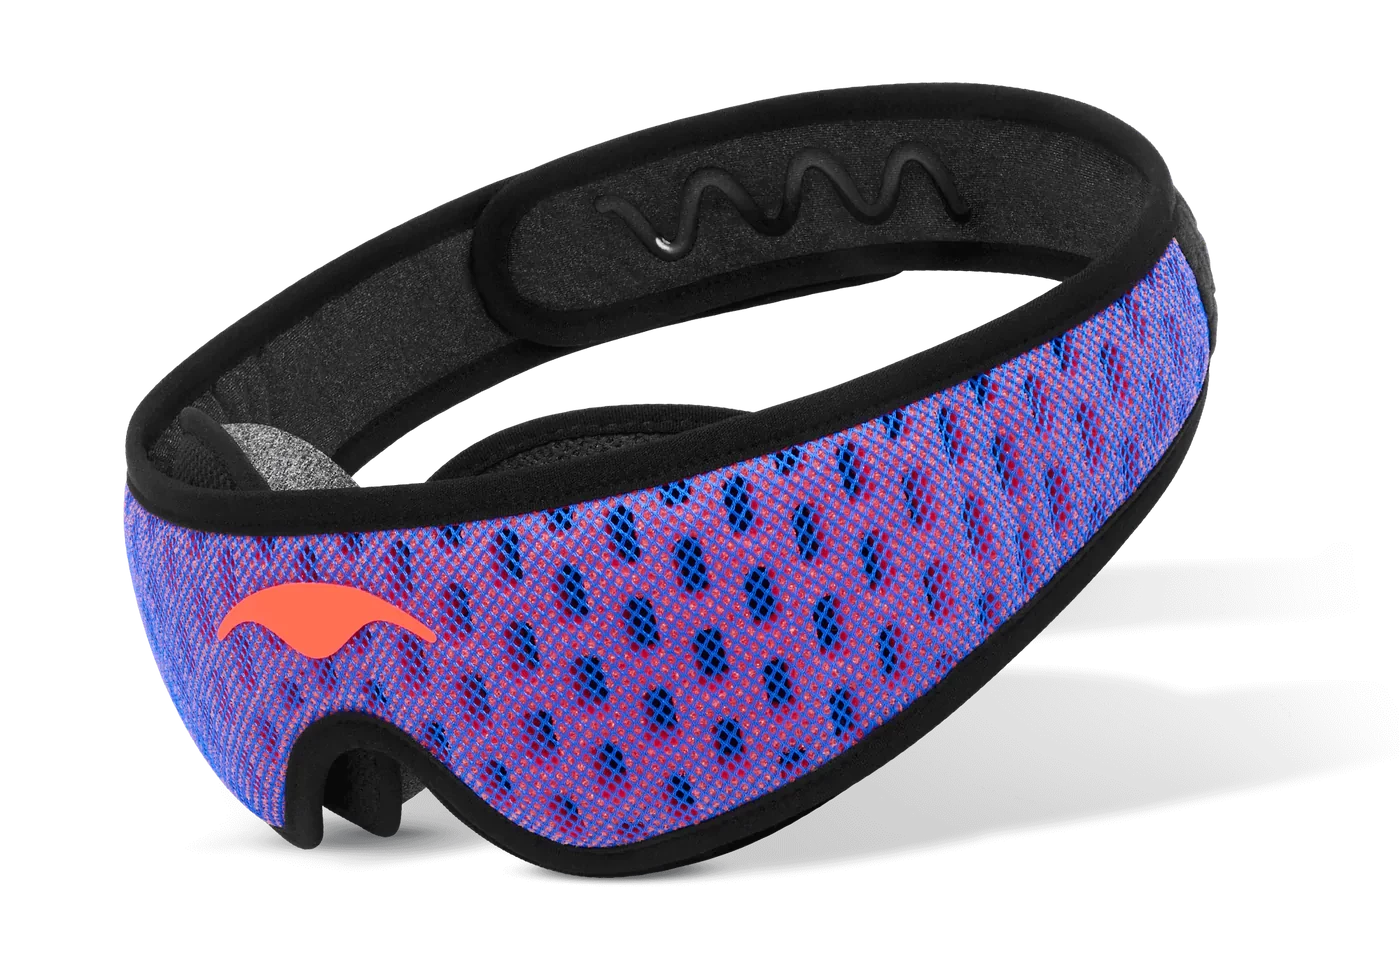 A blue mesh contoured sleep mask with eye cups for side sleeping.